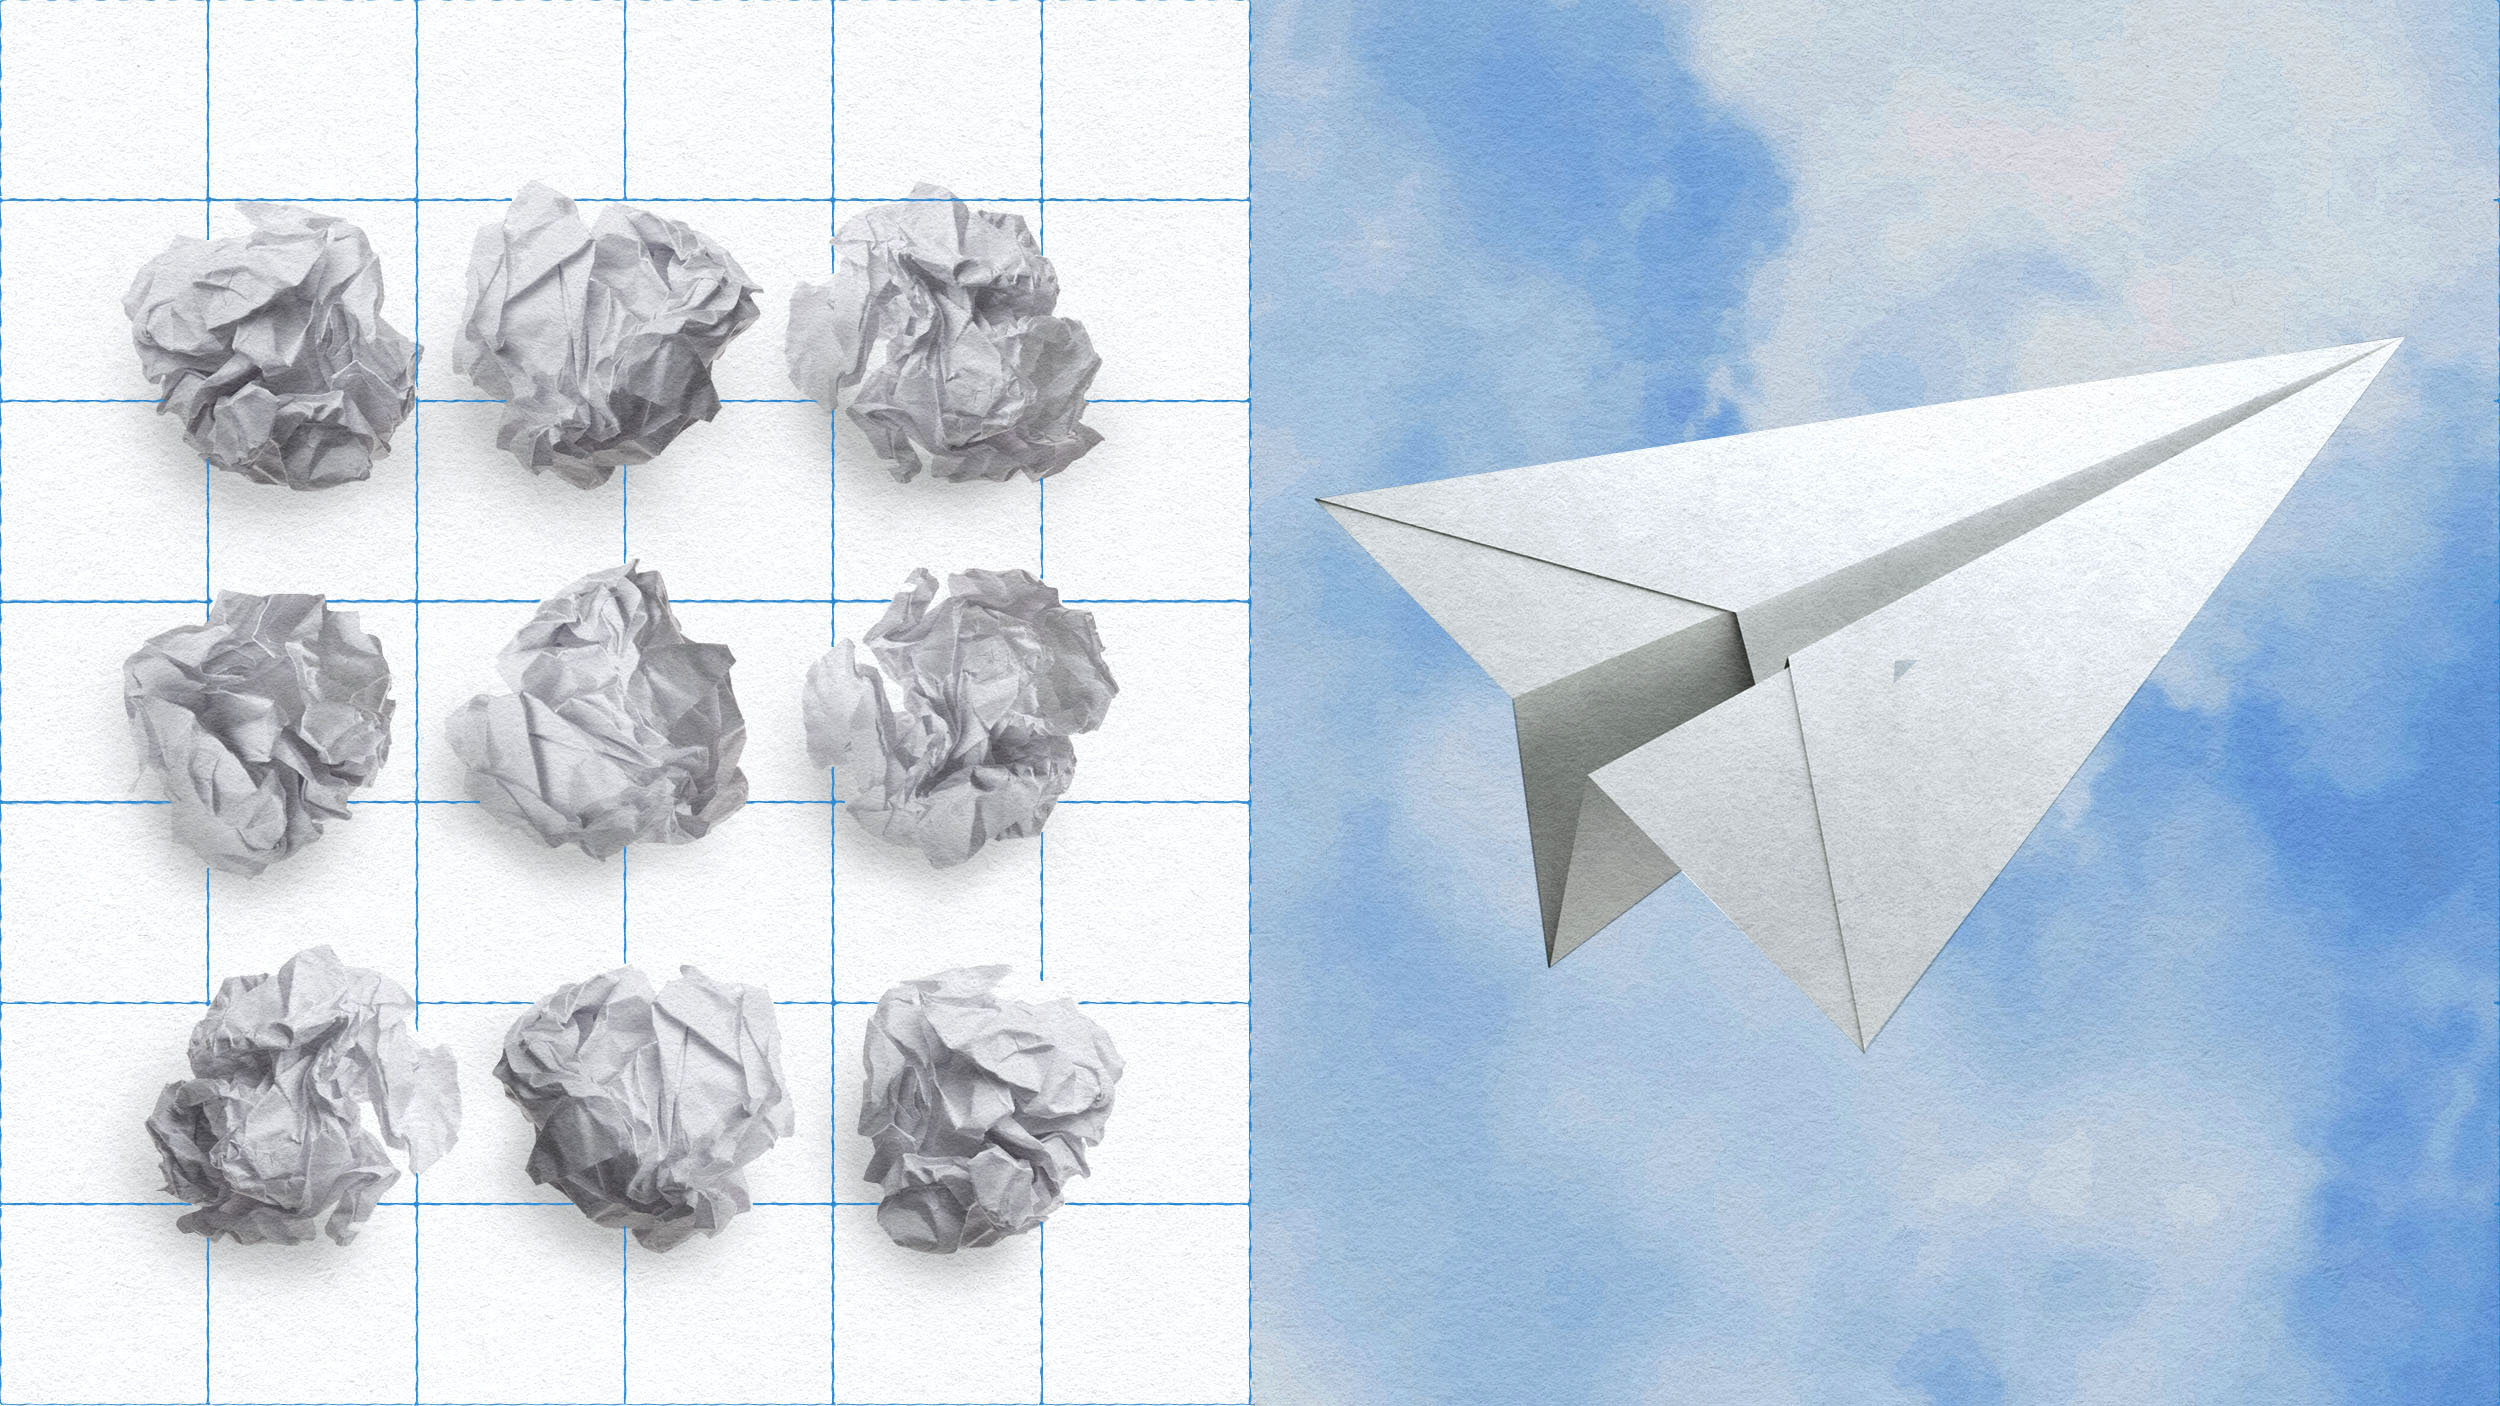 A failure of a paper airplane constructed from crumpled paper.